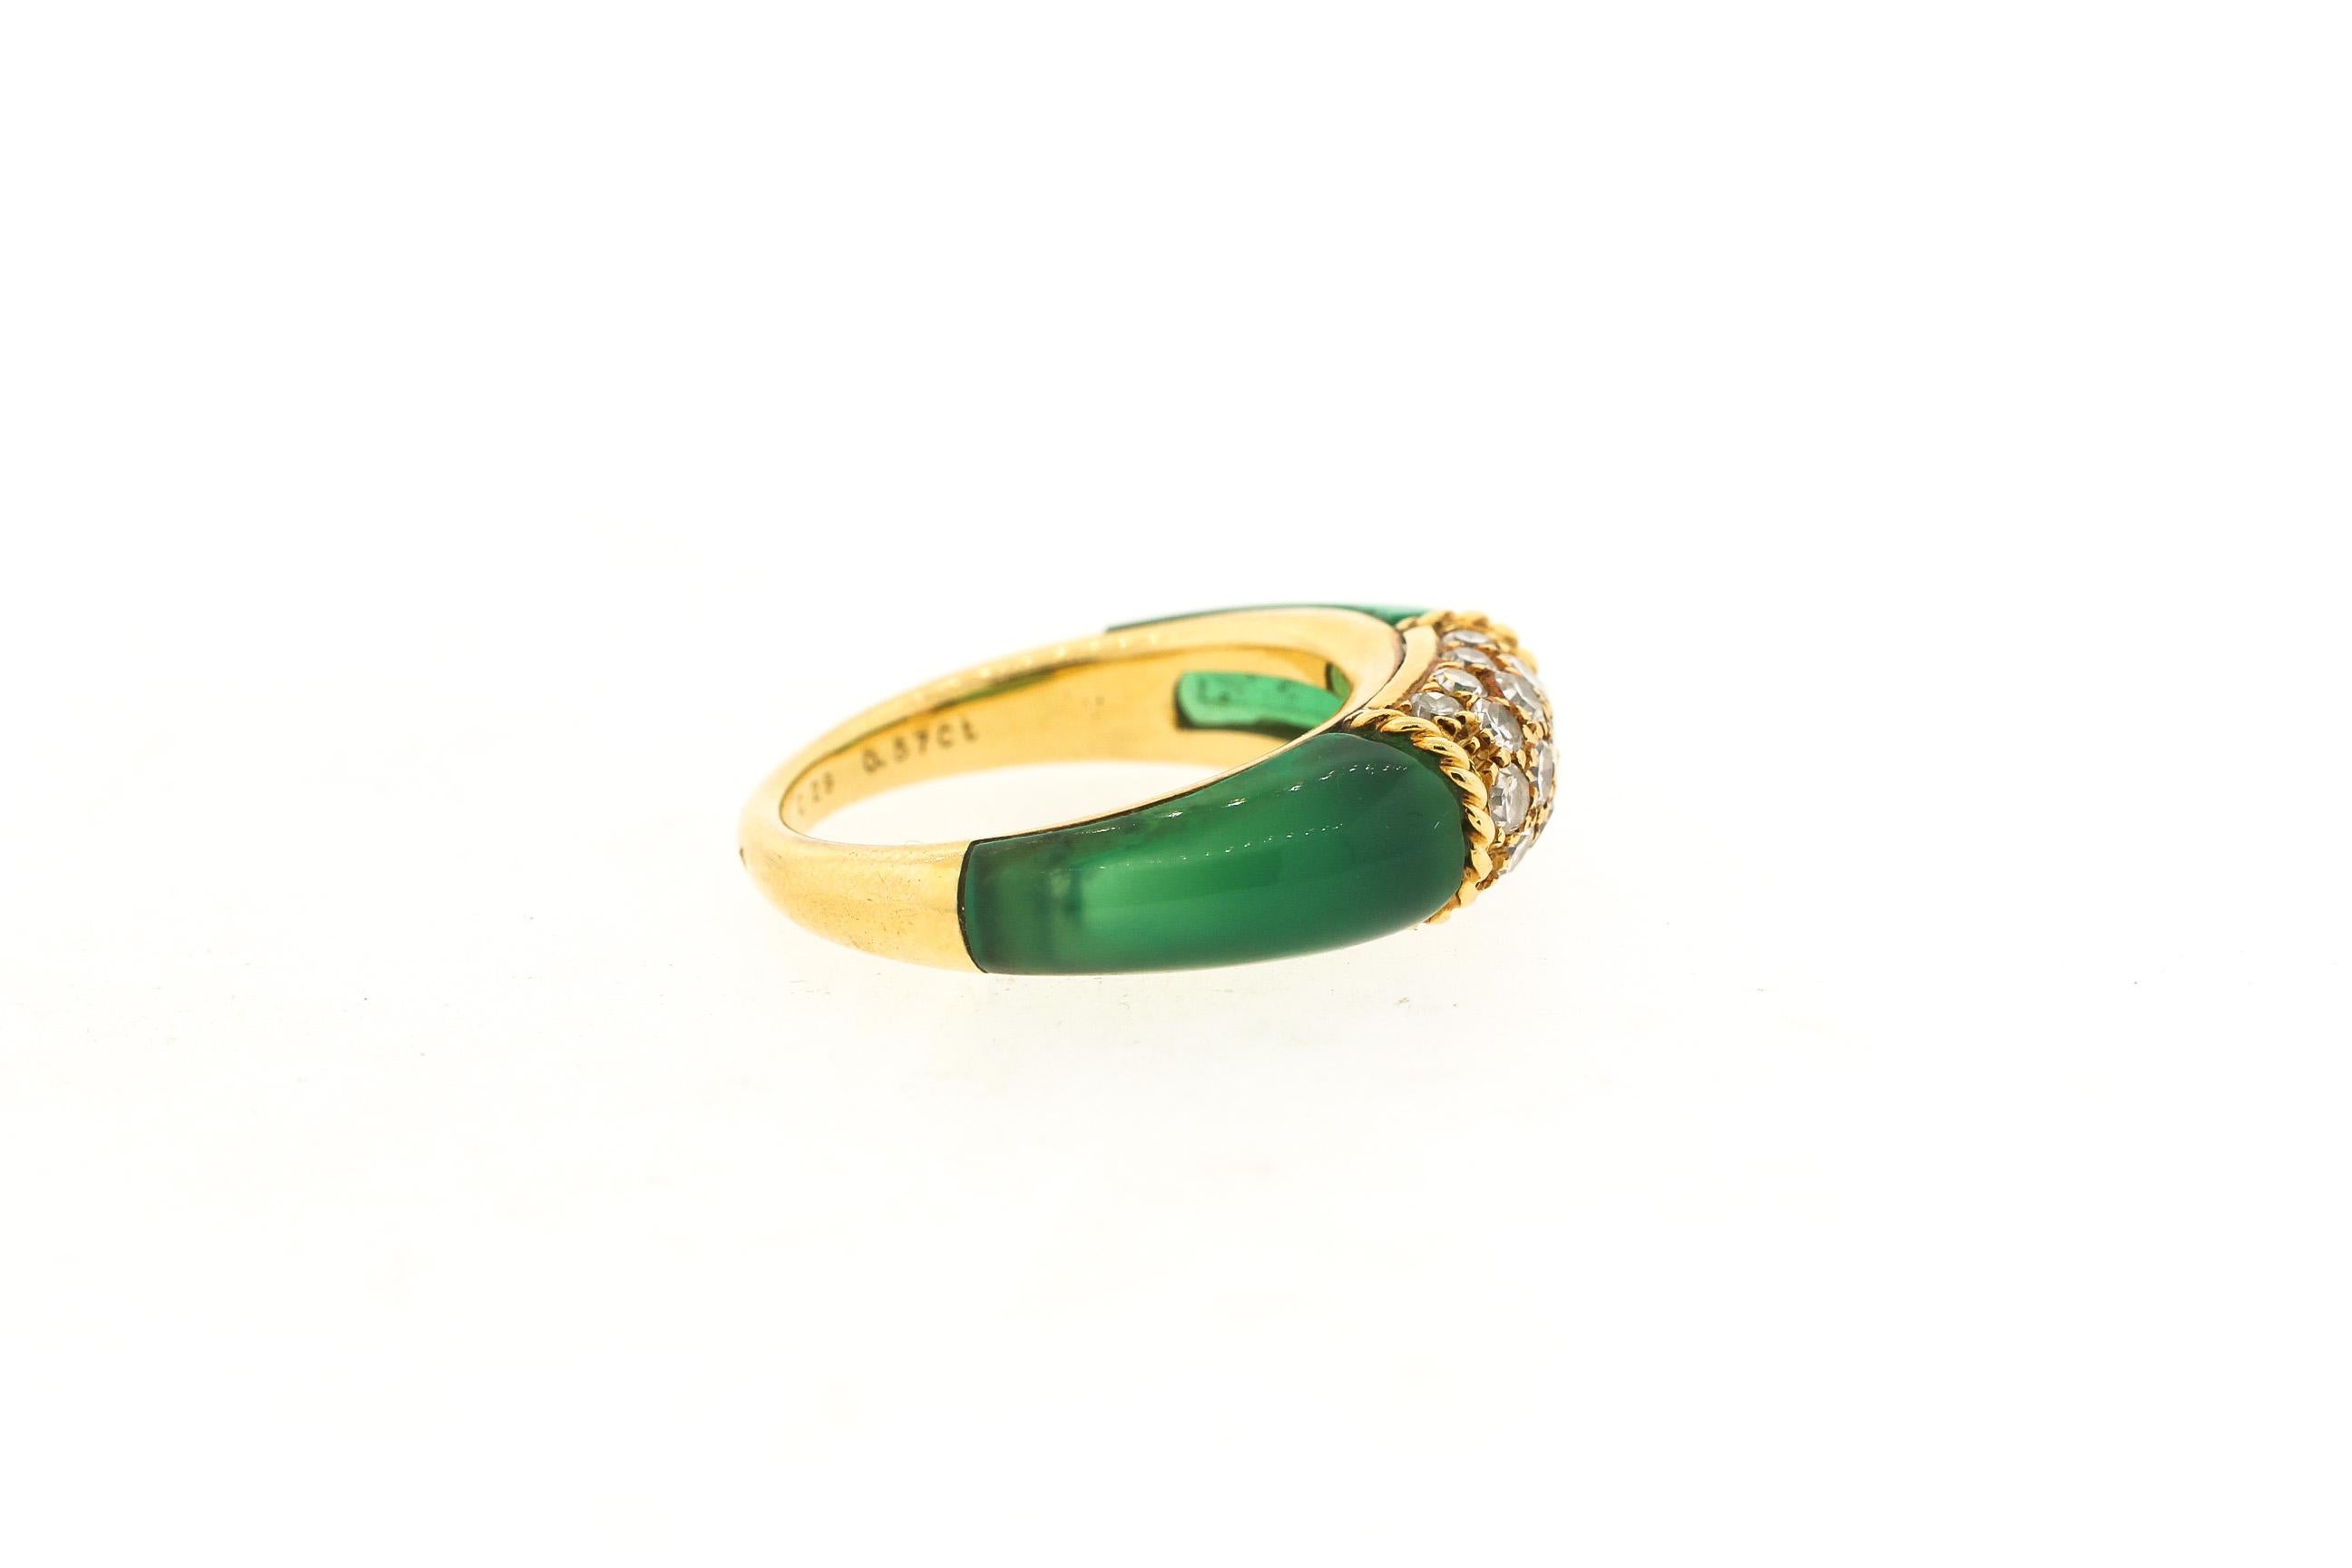 Vintage 18k yellow gold green chalcedony and diamond ring by Van Cleef & Arpels circa 1970. The ring design is what they called the “Philippines” collection, and they were made in all sorts of colorful hard stones, such as agate, tigers eye and